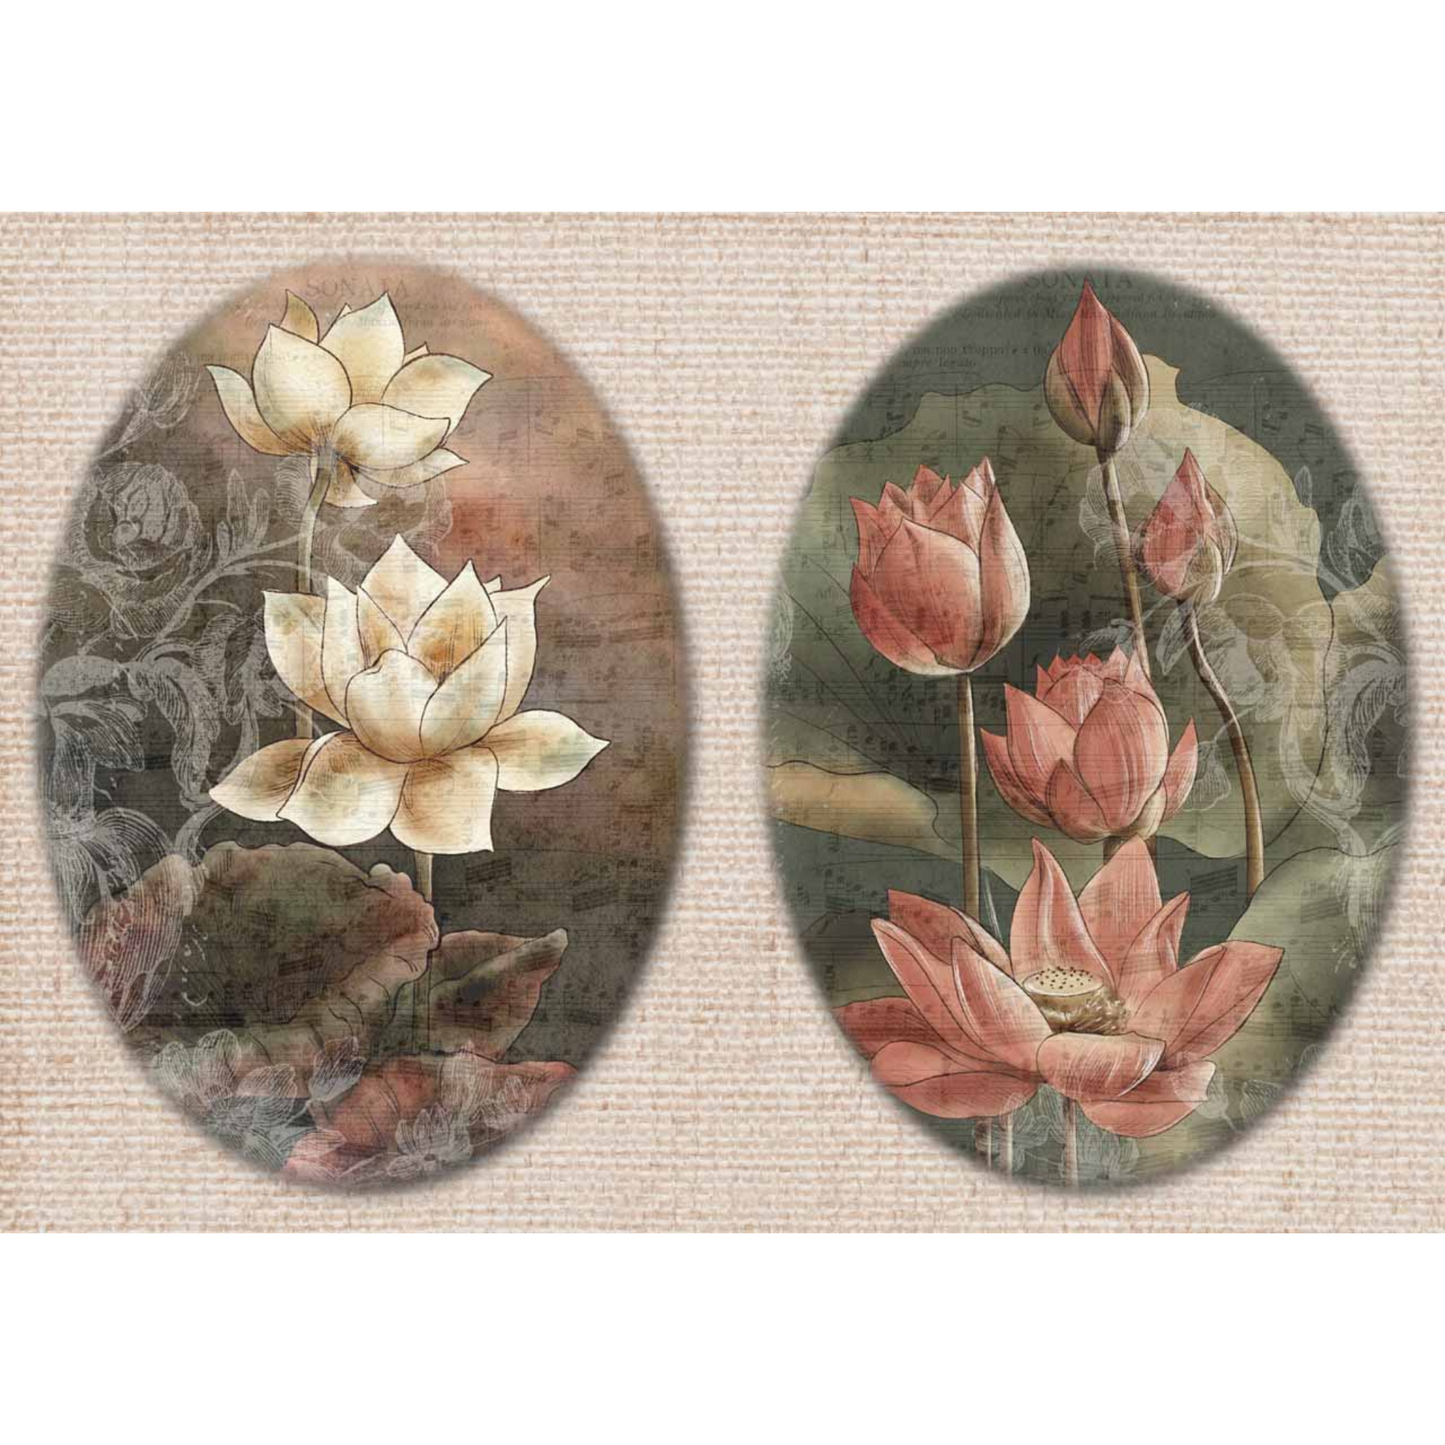 Dainty and the Queen-Lotus-Decoupage Rice Paper by Decoupage Queen. Size A4-8.3" x 11.7" is available at Milton's Daughter.